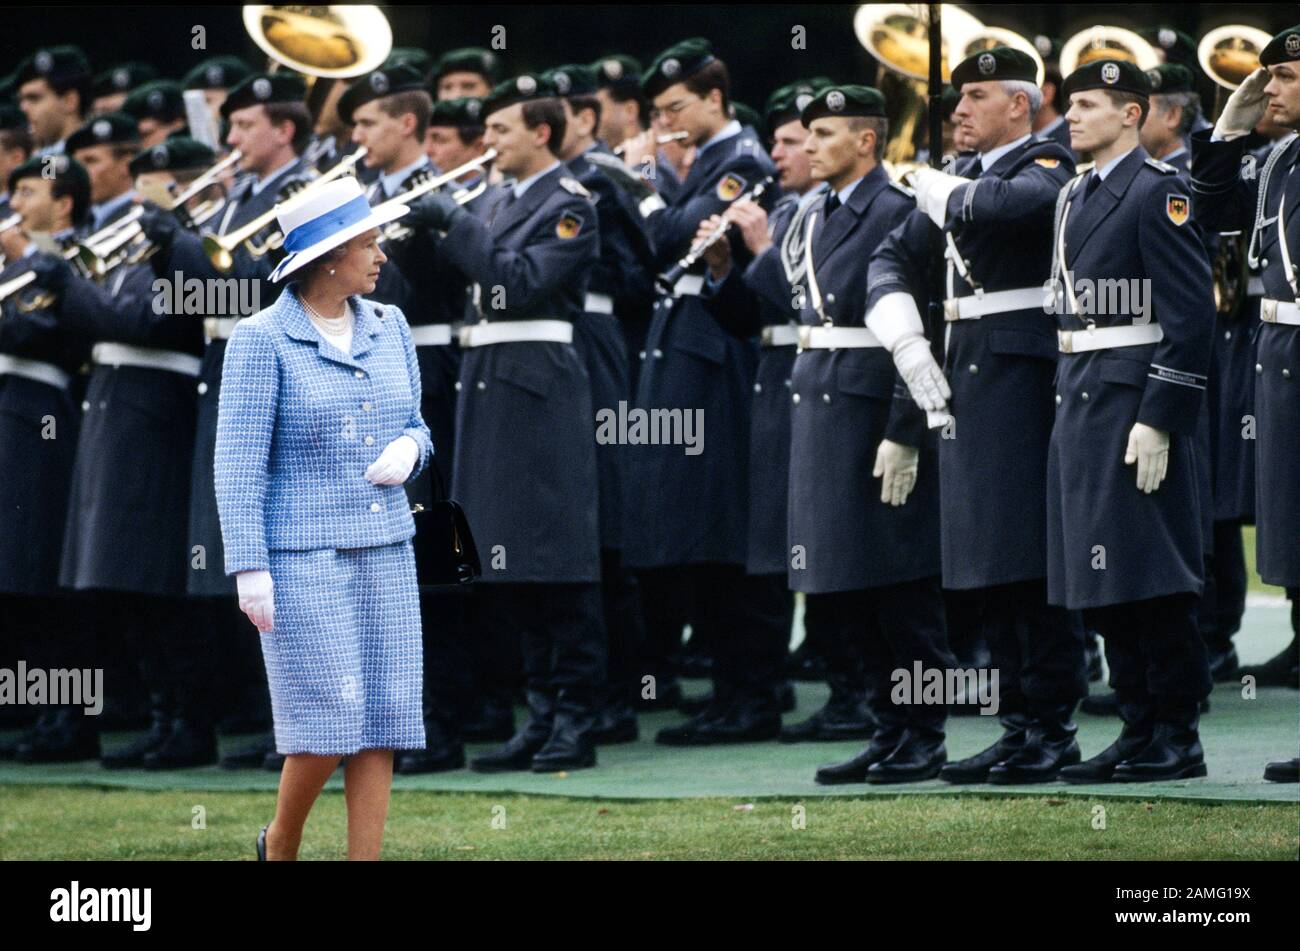 HM Queen Elizabeth II inspects the German Army at San Souci Palace, Potsdam, Berlin, Germany 1992. Stock Photo